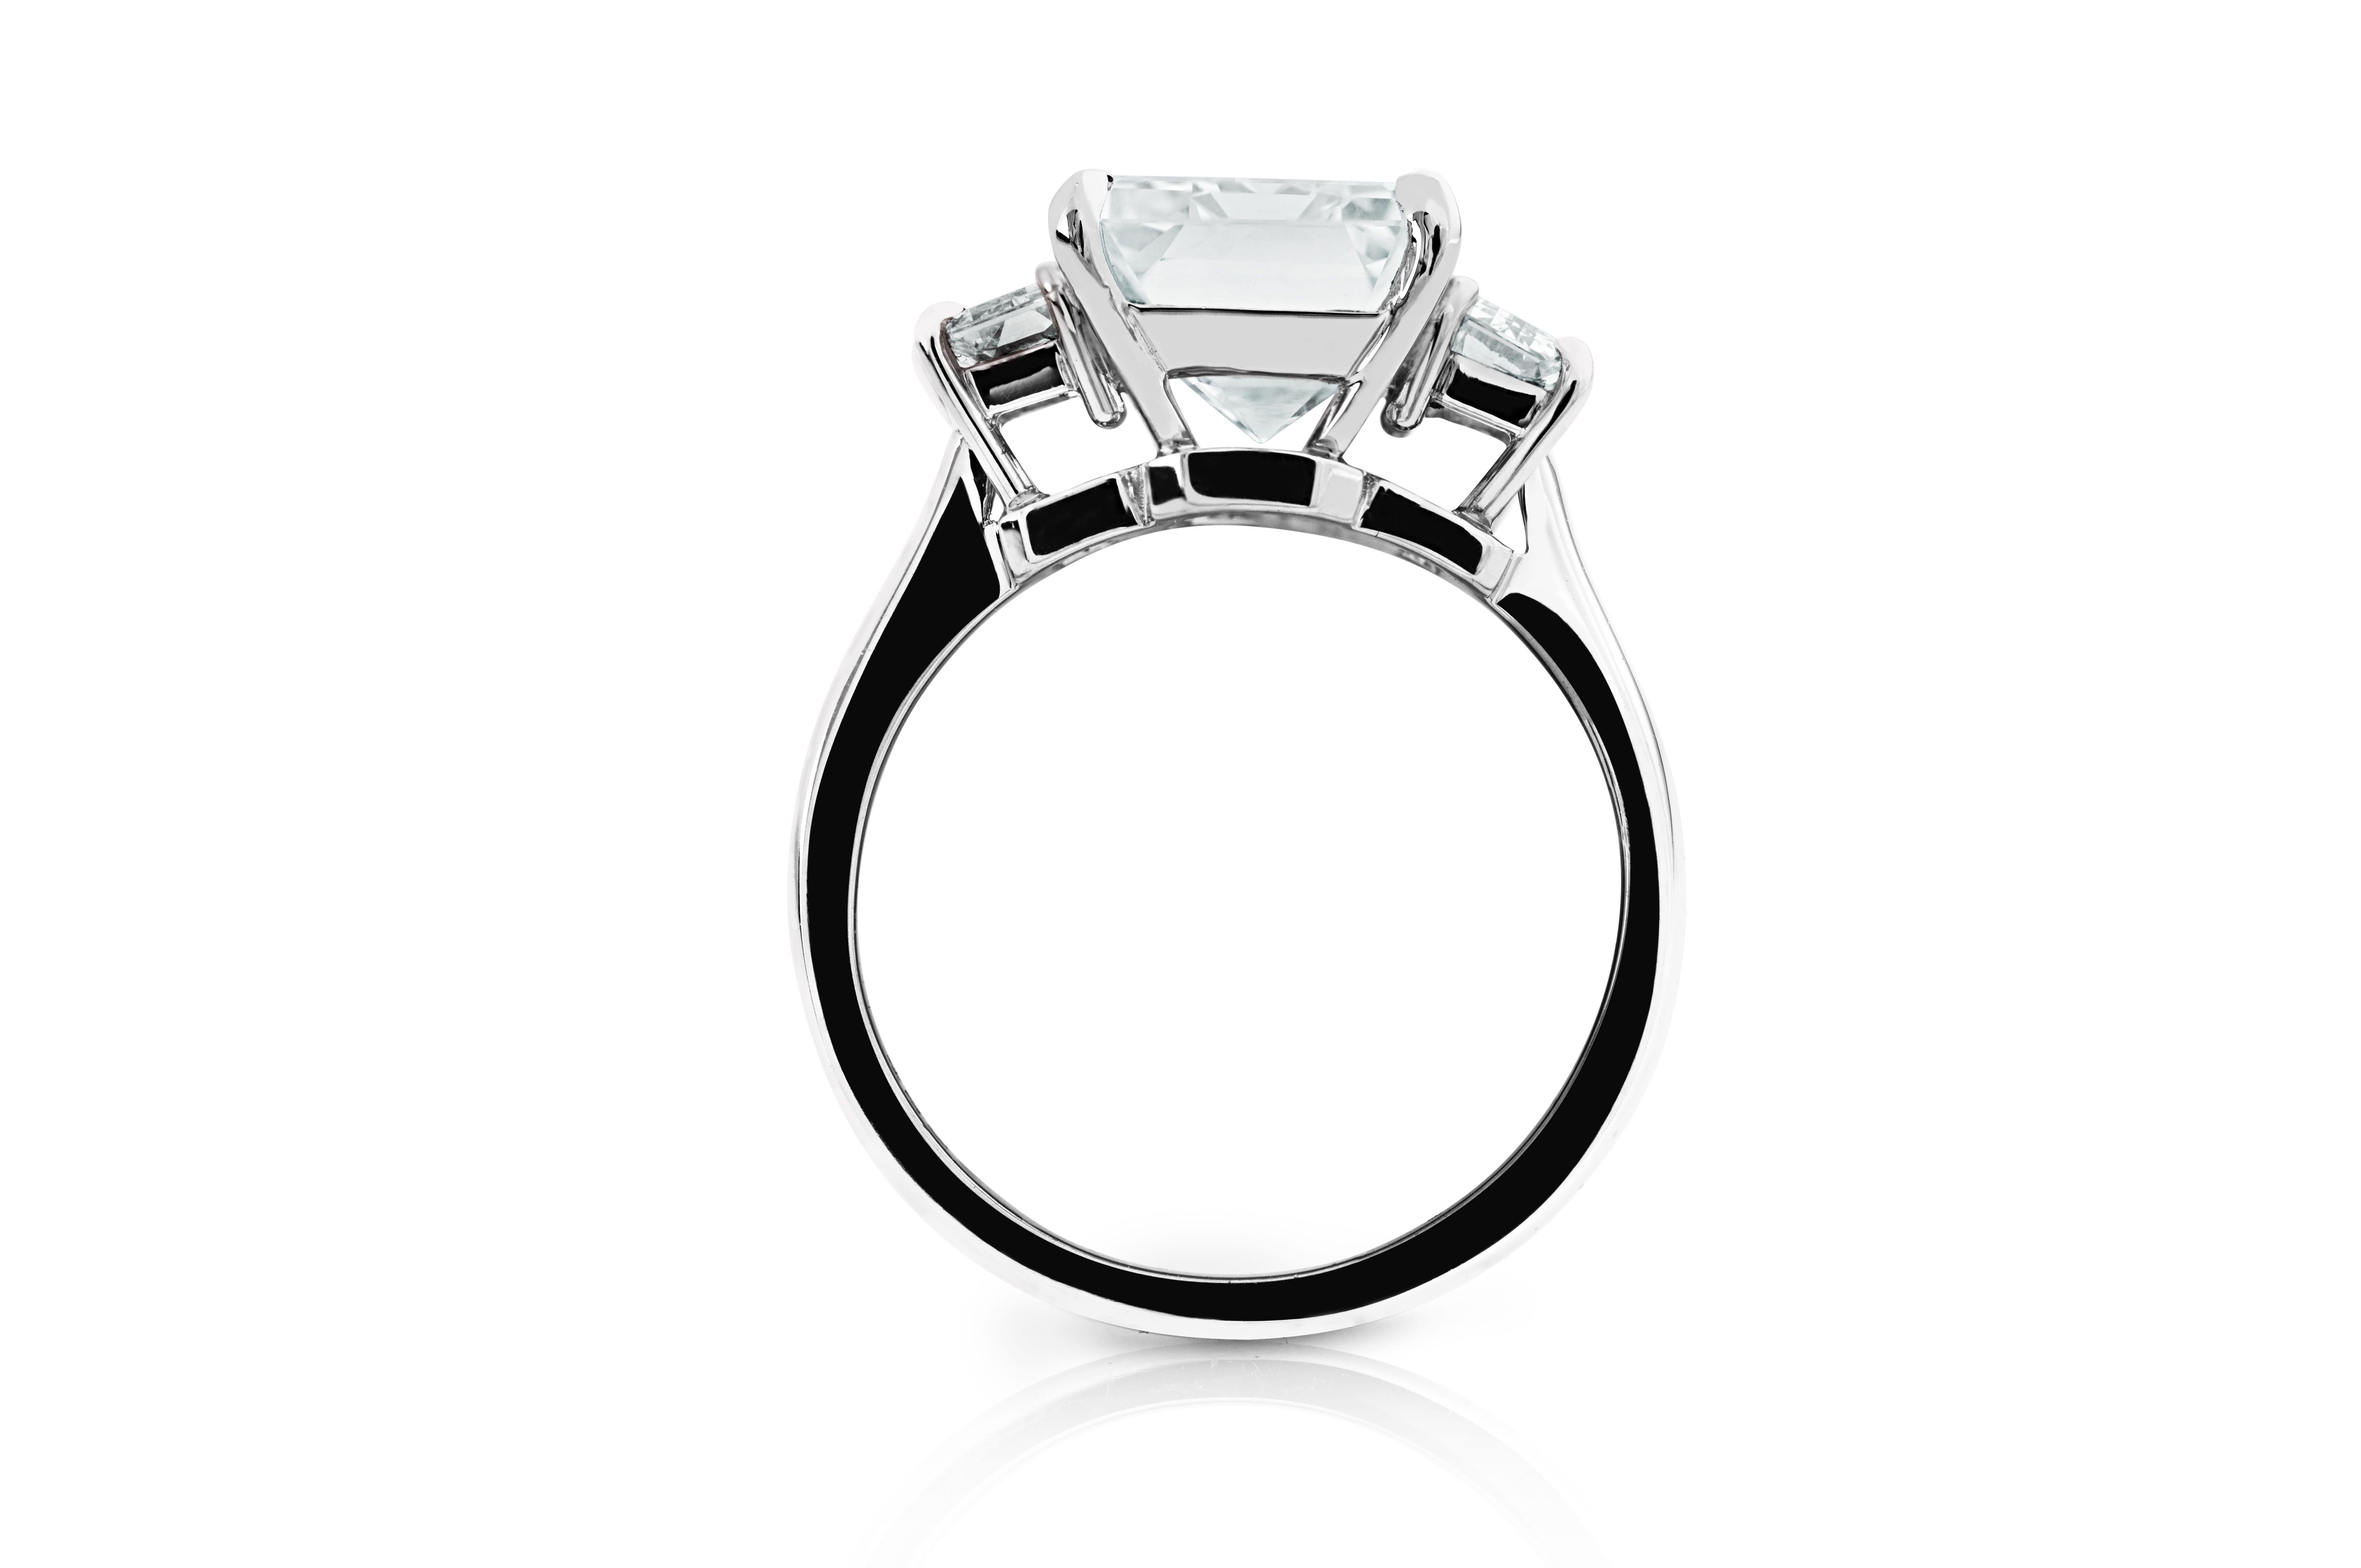 GIA Certified 5.80 carat Emerald-Cut diamond is perfectly accentuated with another two beautifully emerald cut diamonds mounted on the side respectively in Platinum ring. This stylish three-stone ring features the sophisticated statement and the